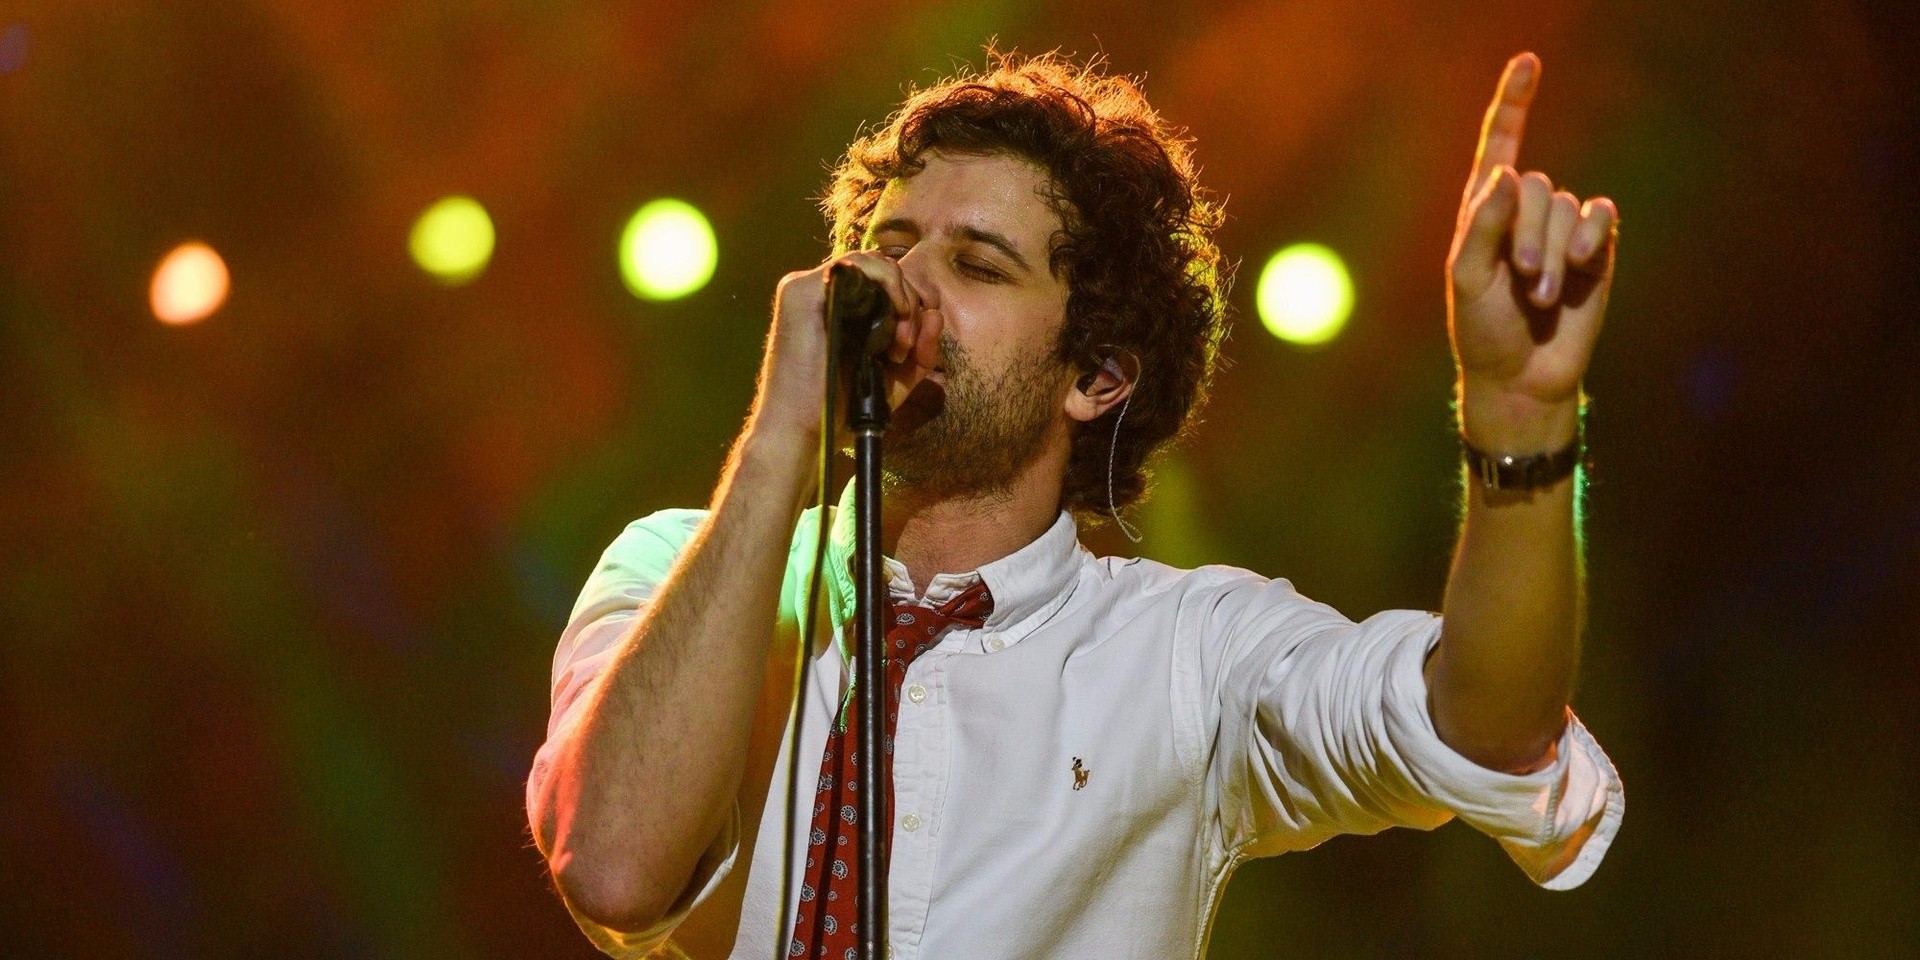 Passion Pit claims he has not been paid for Manila show